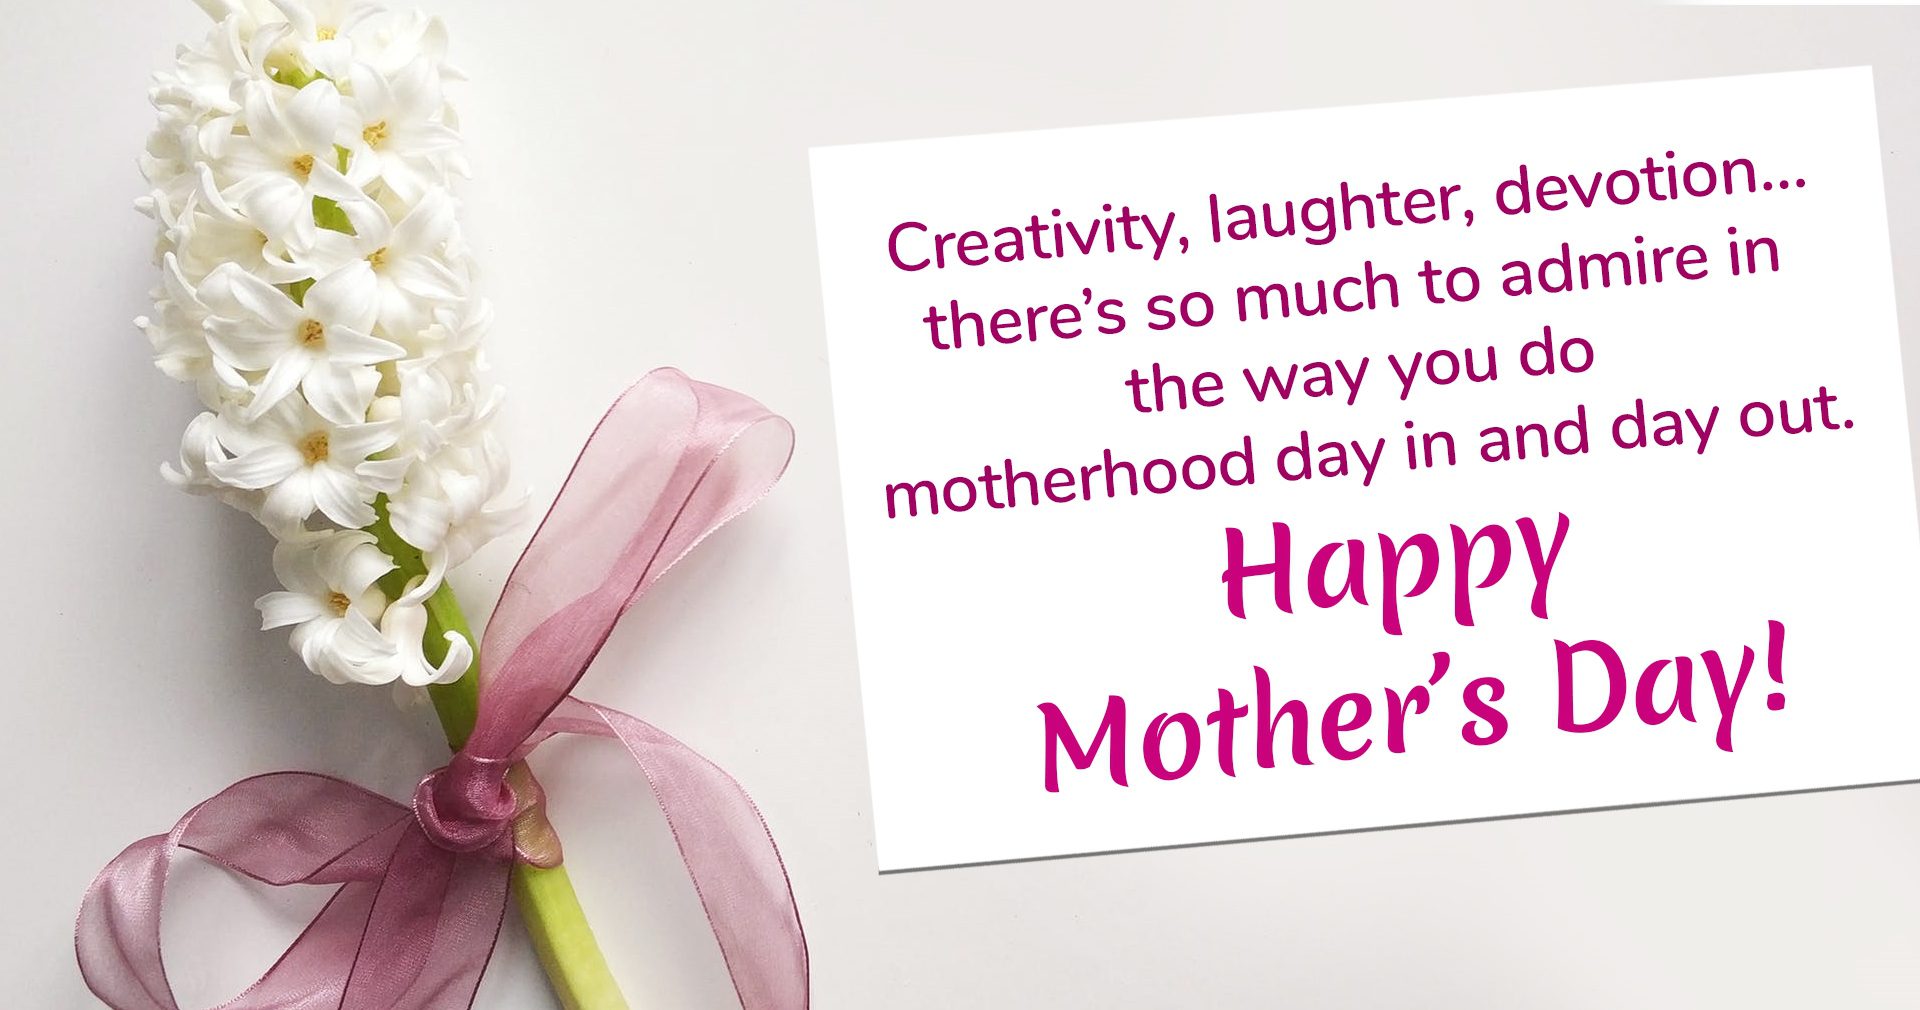 Mothers Day Wishes Messages For Colleagues